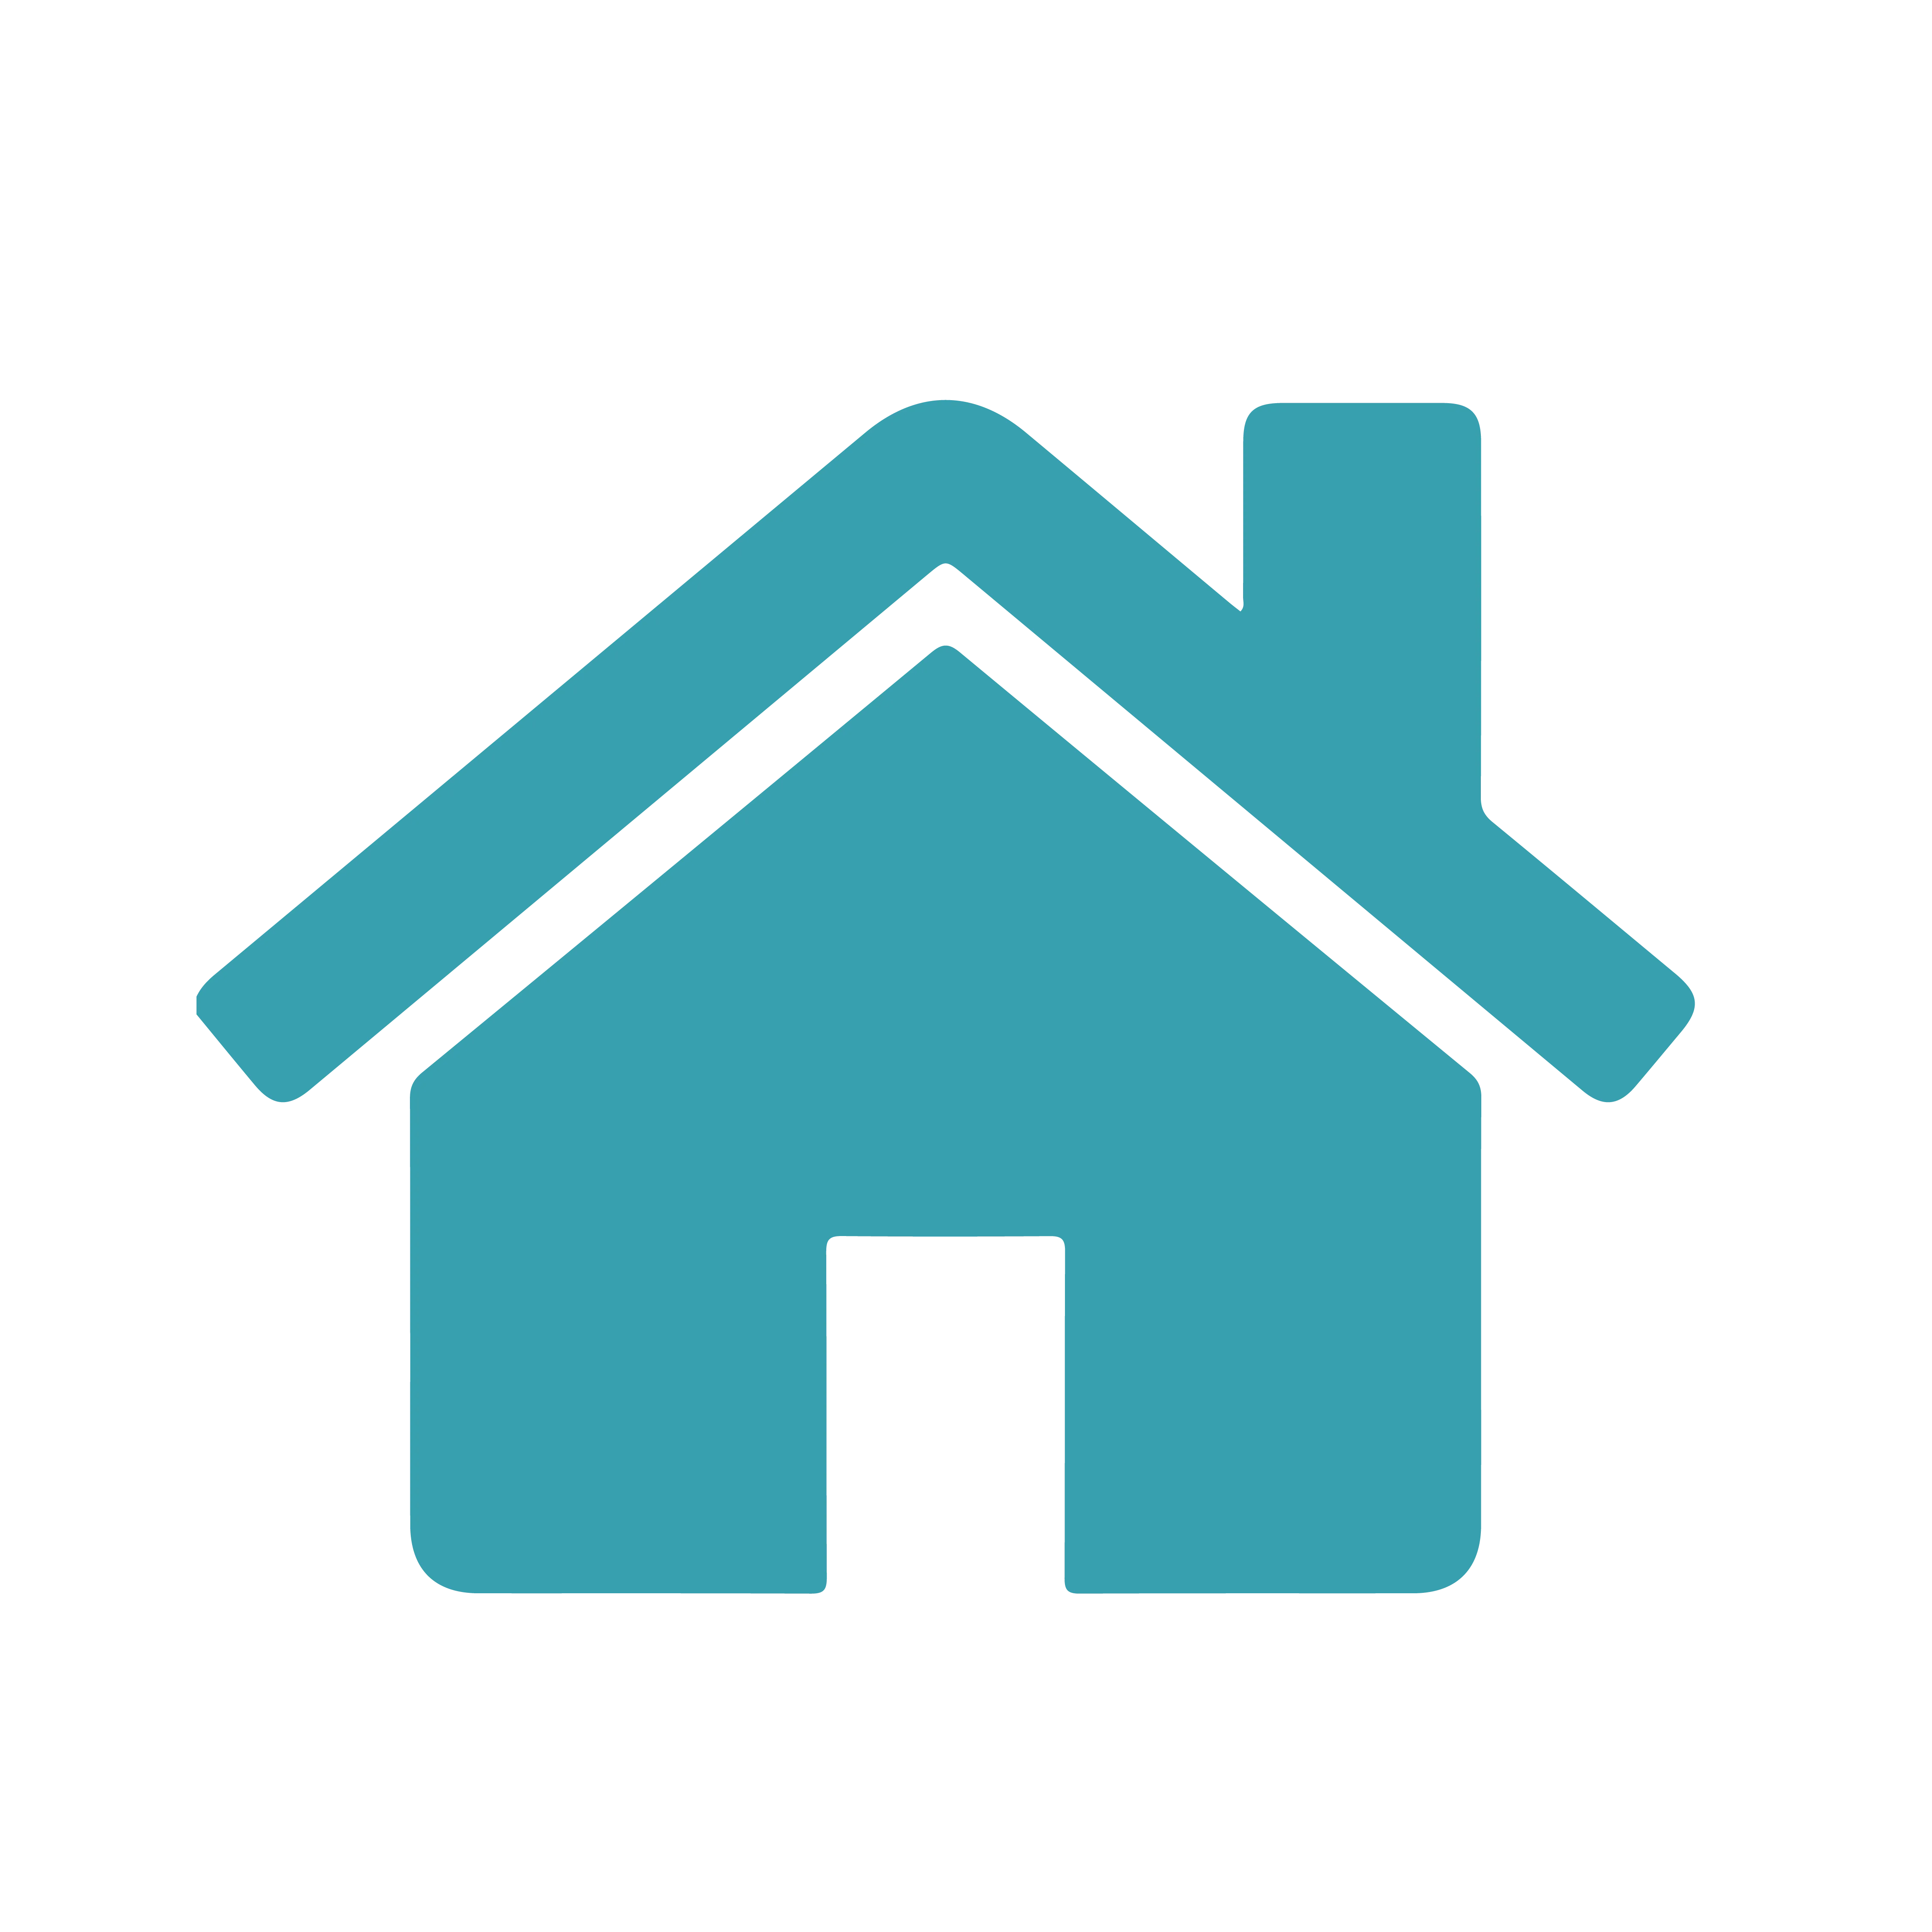 House Icon - Graphic representation of a house, symbolizing estate planning, property management and safeguarding assets